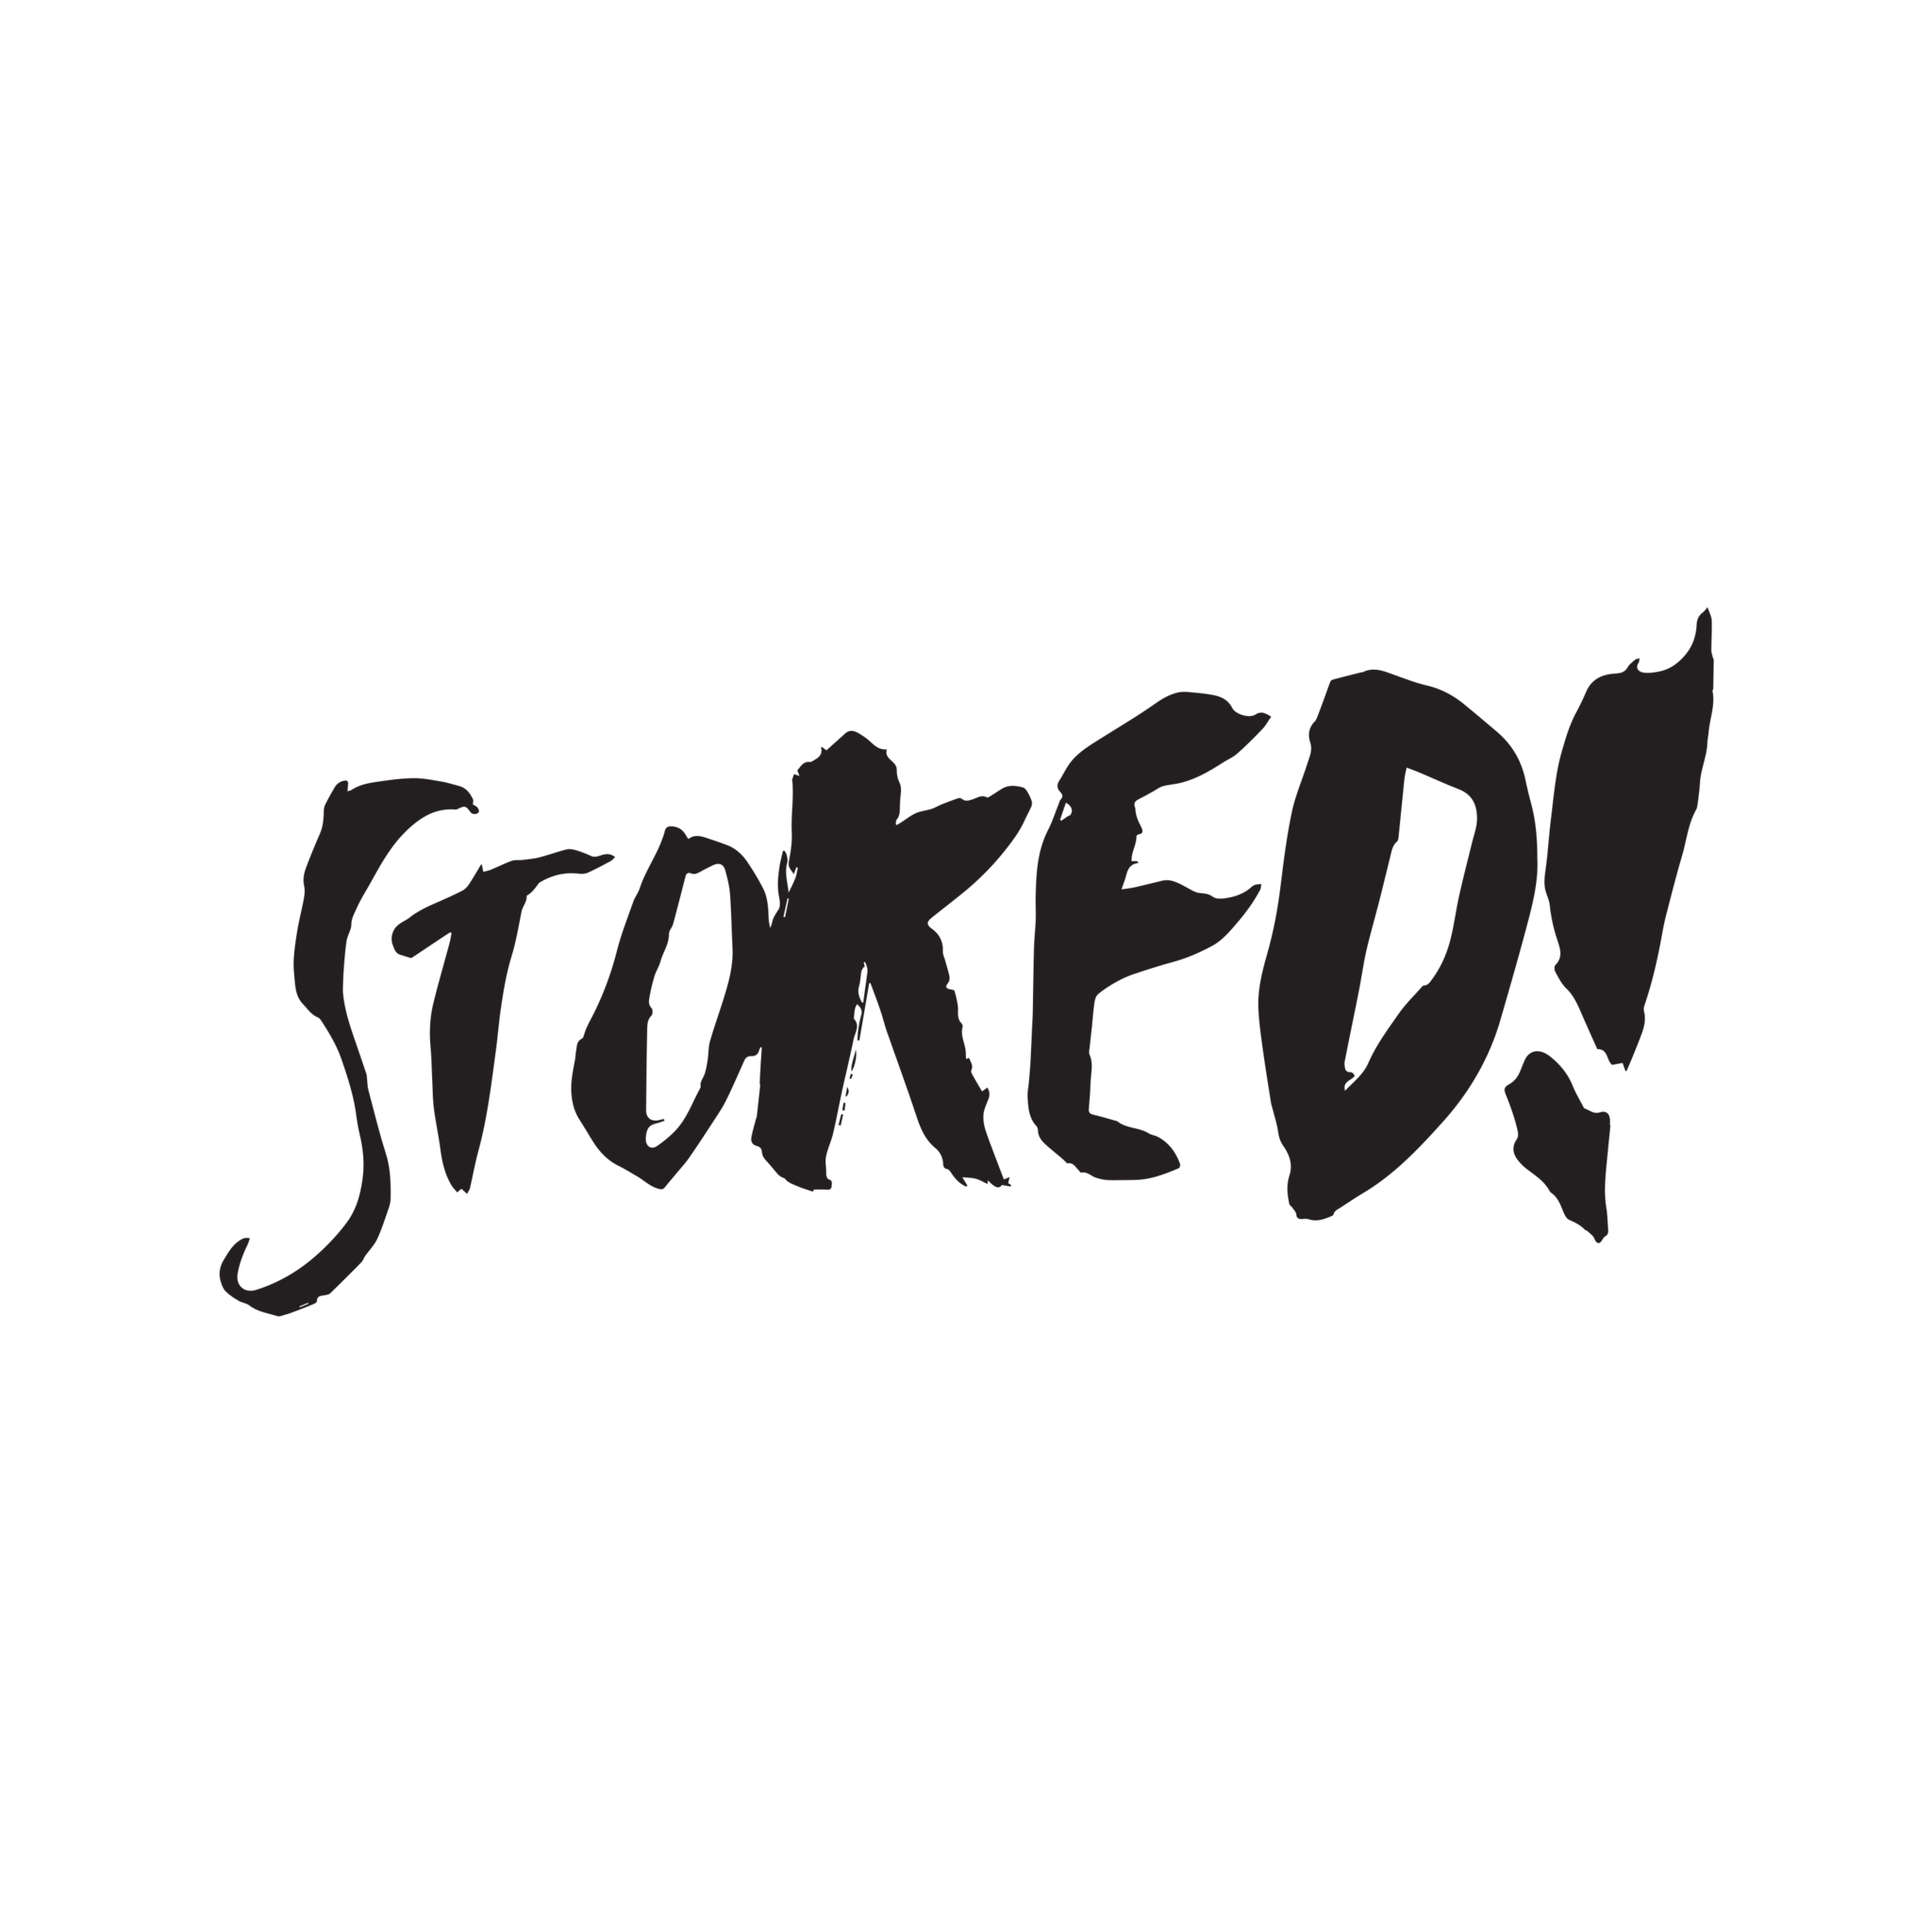 Stoked Logo - Stoked by James Victore from Tattly Temporary Tattoos